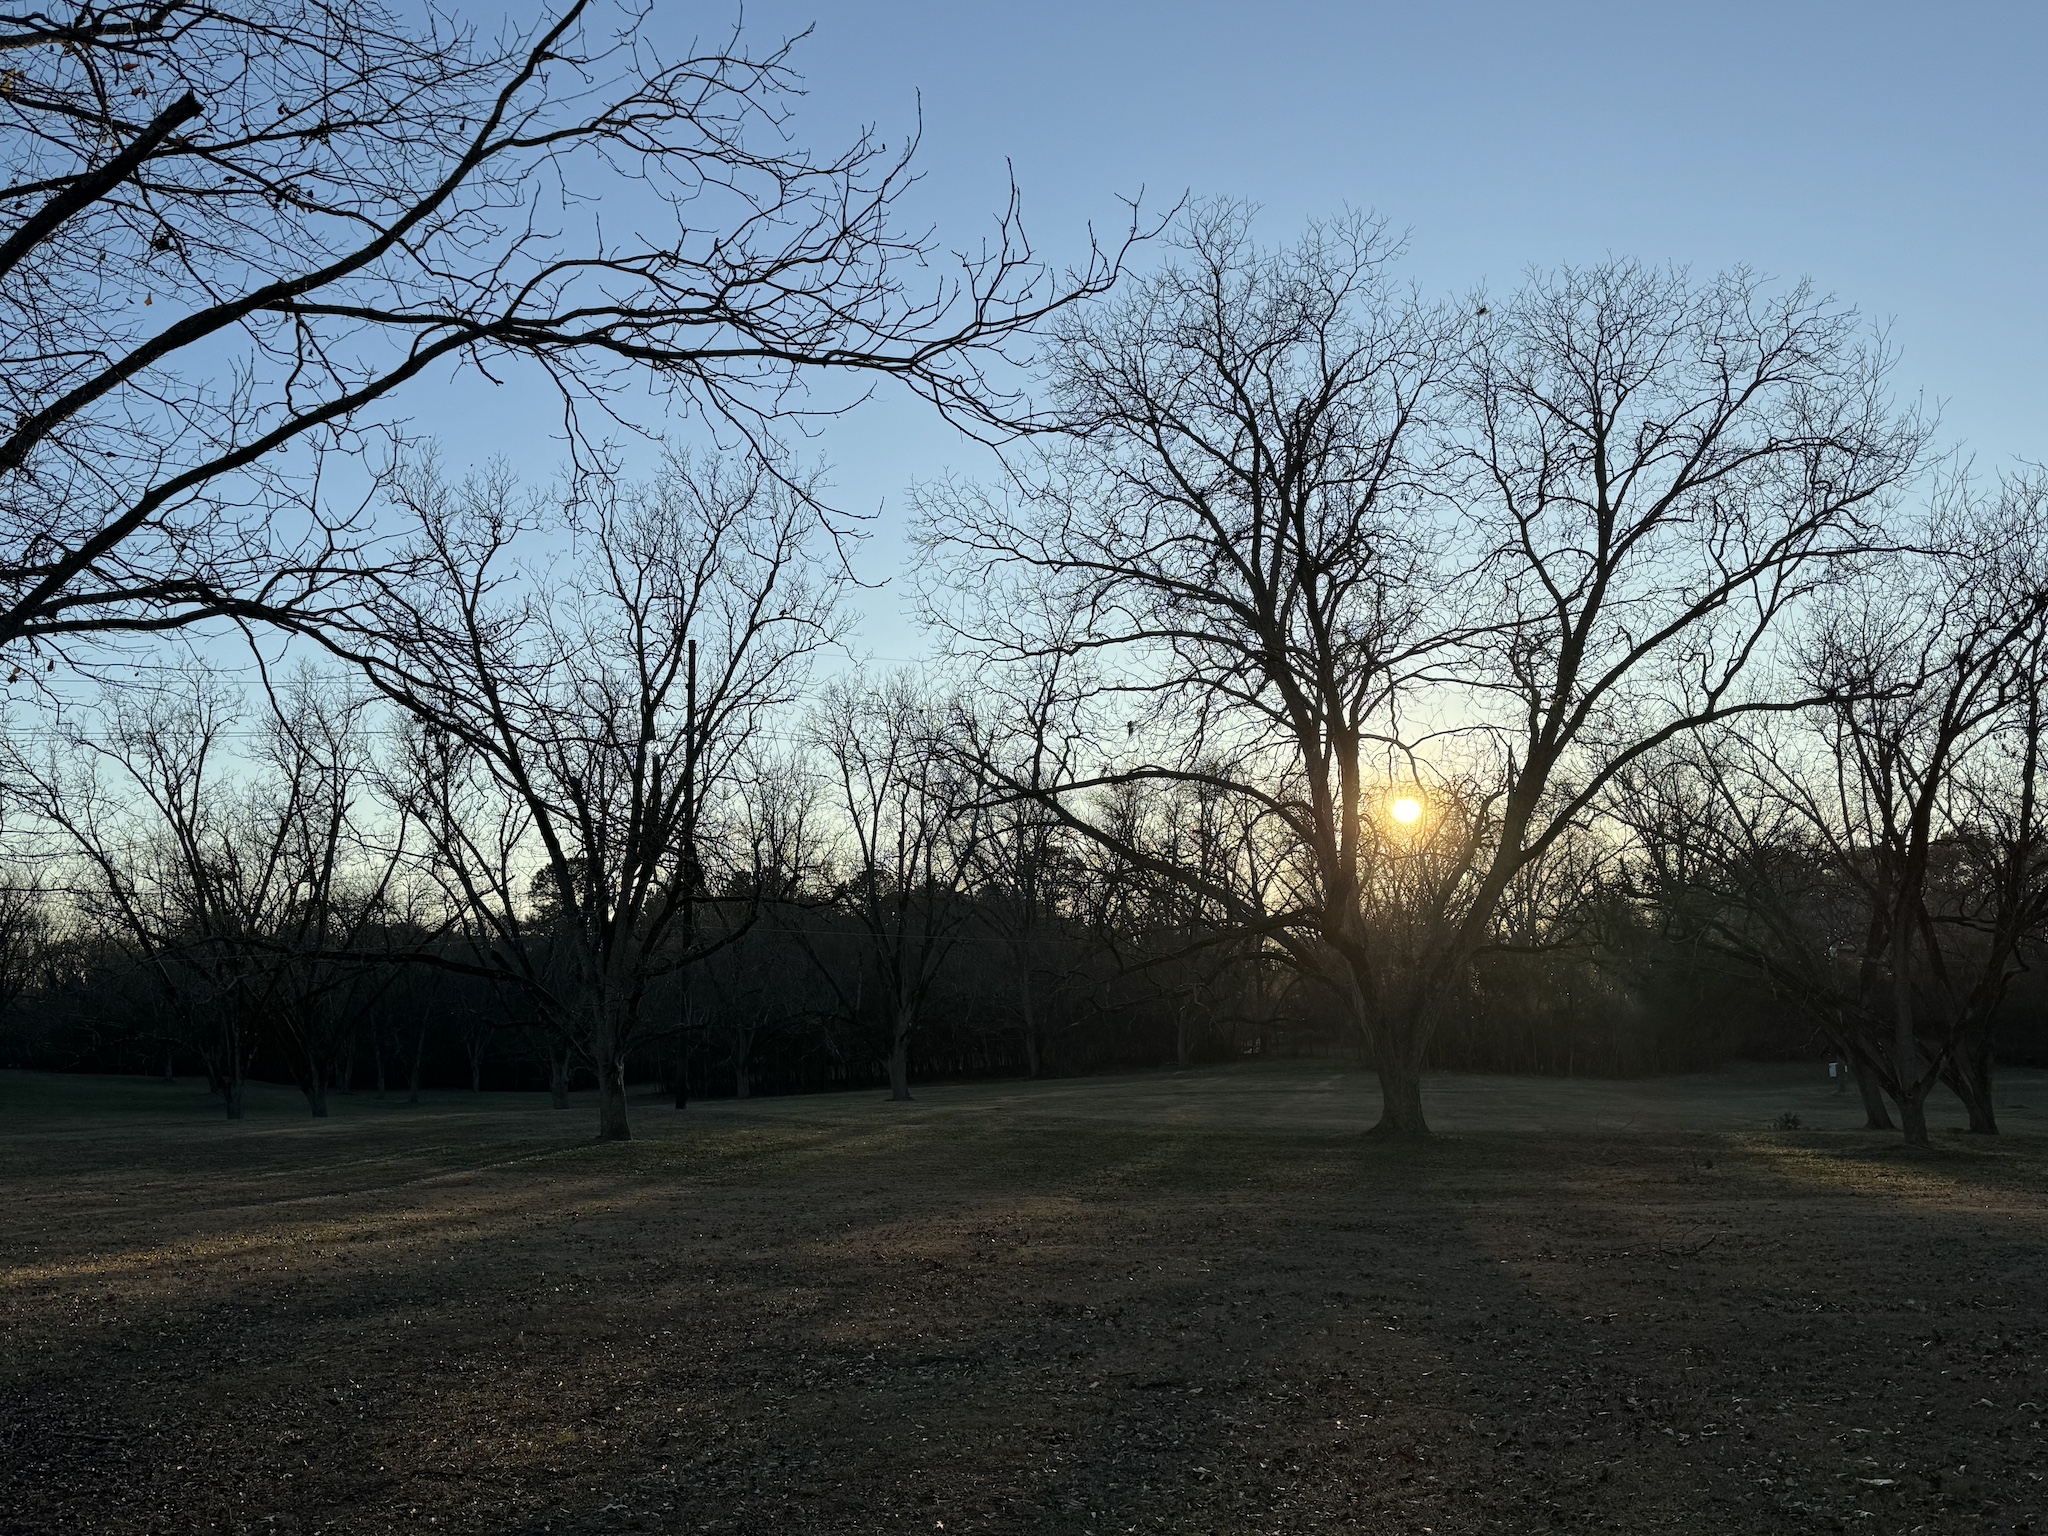 A picture of a forested landscape at sunset, the sun coming through the bare tree branches.